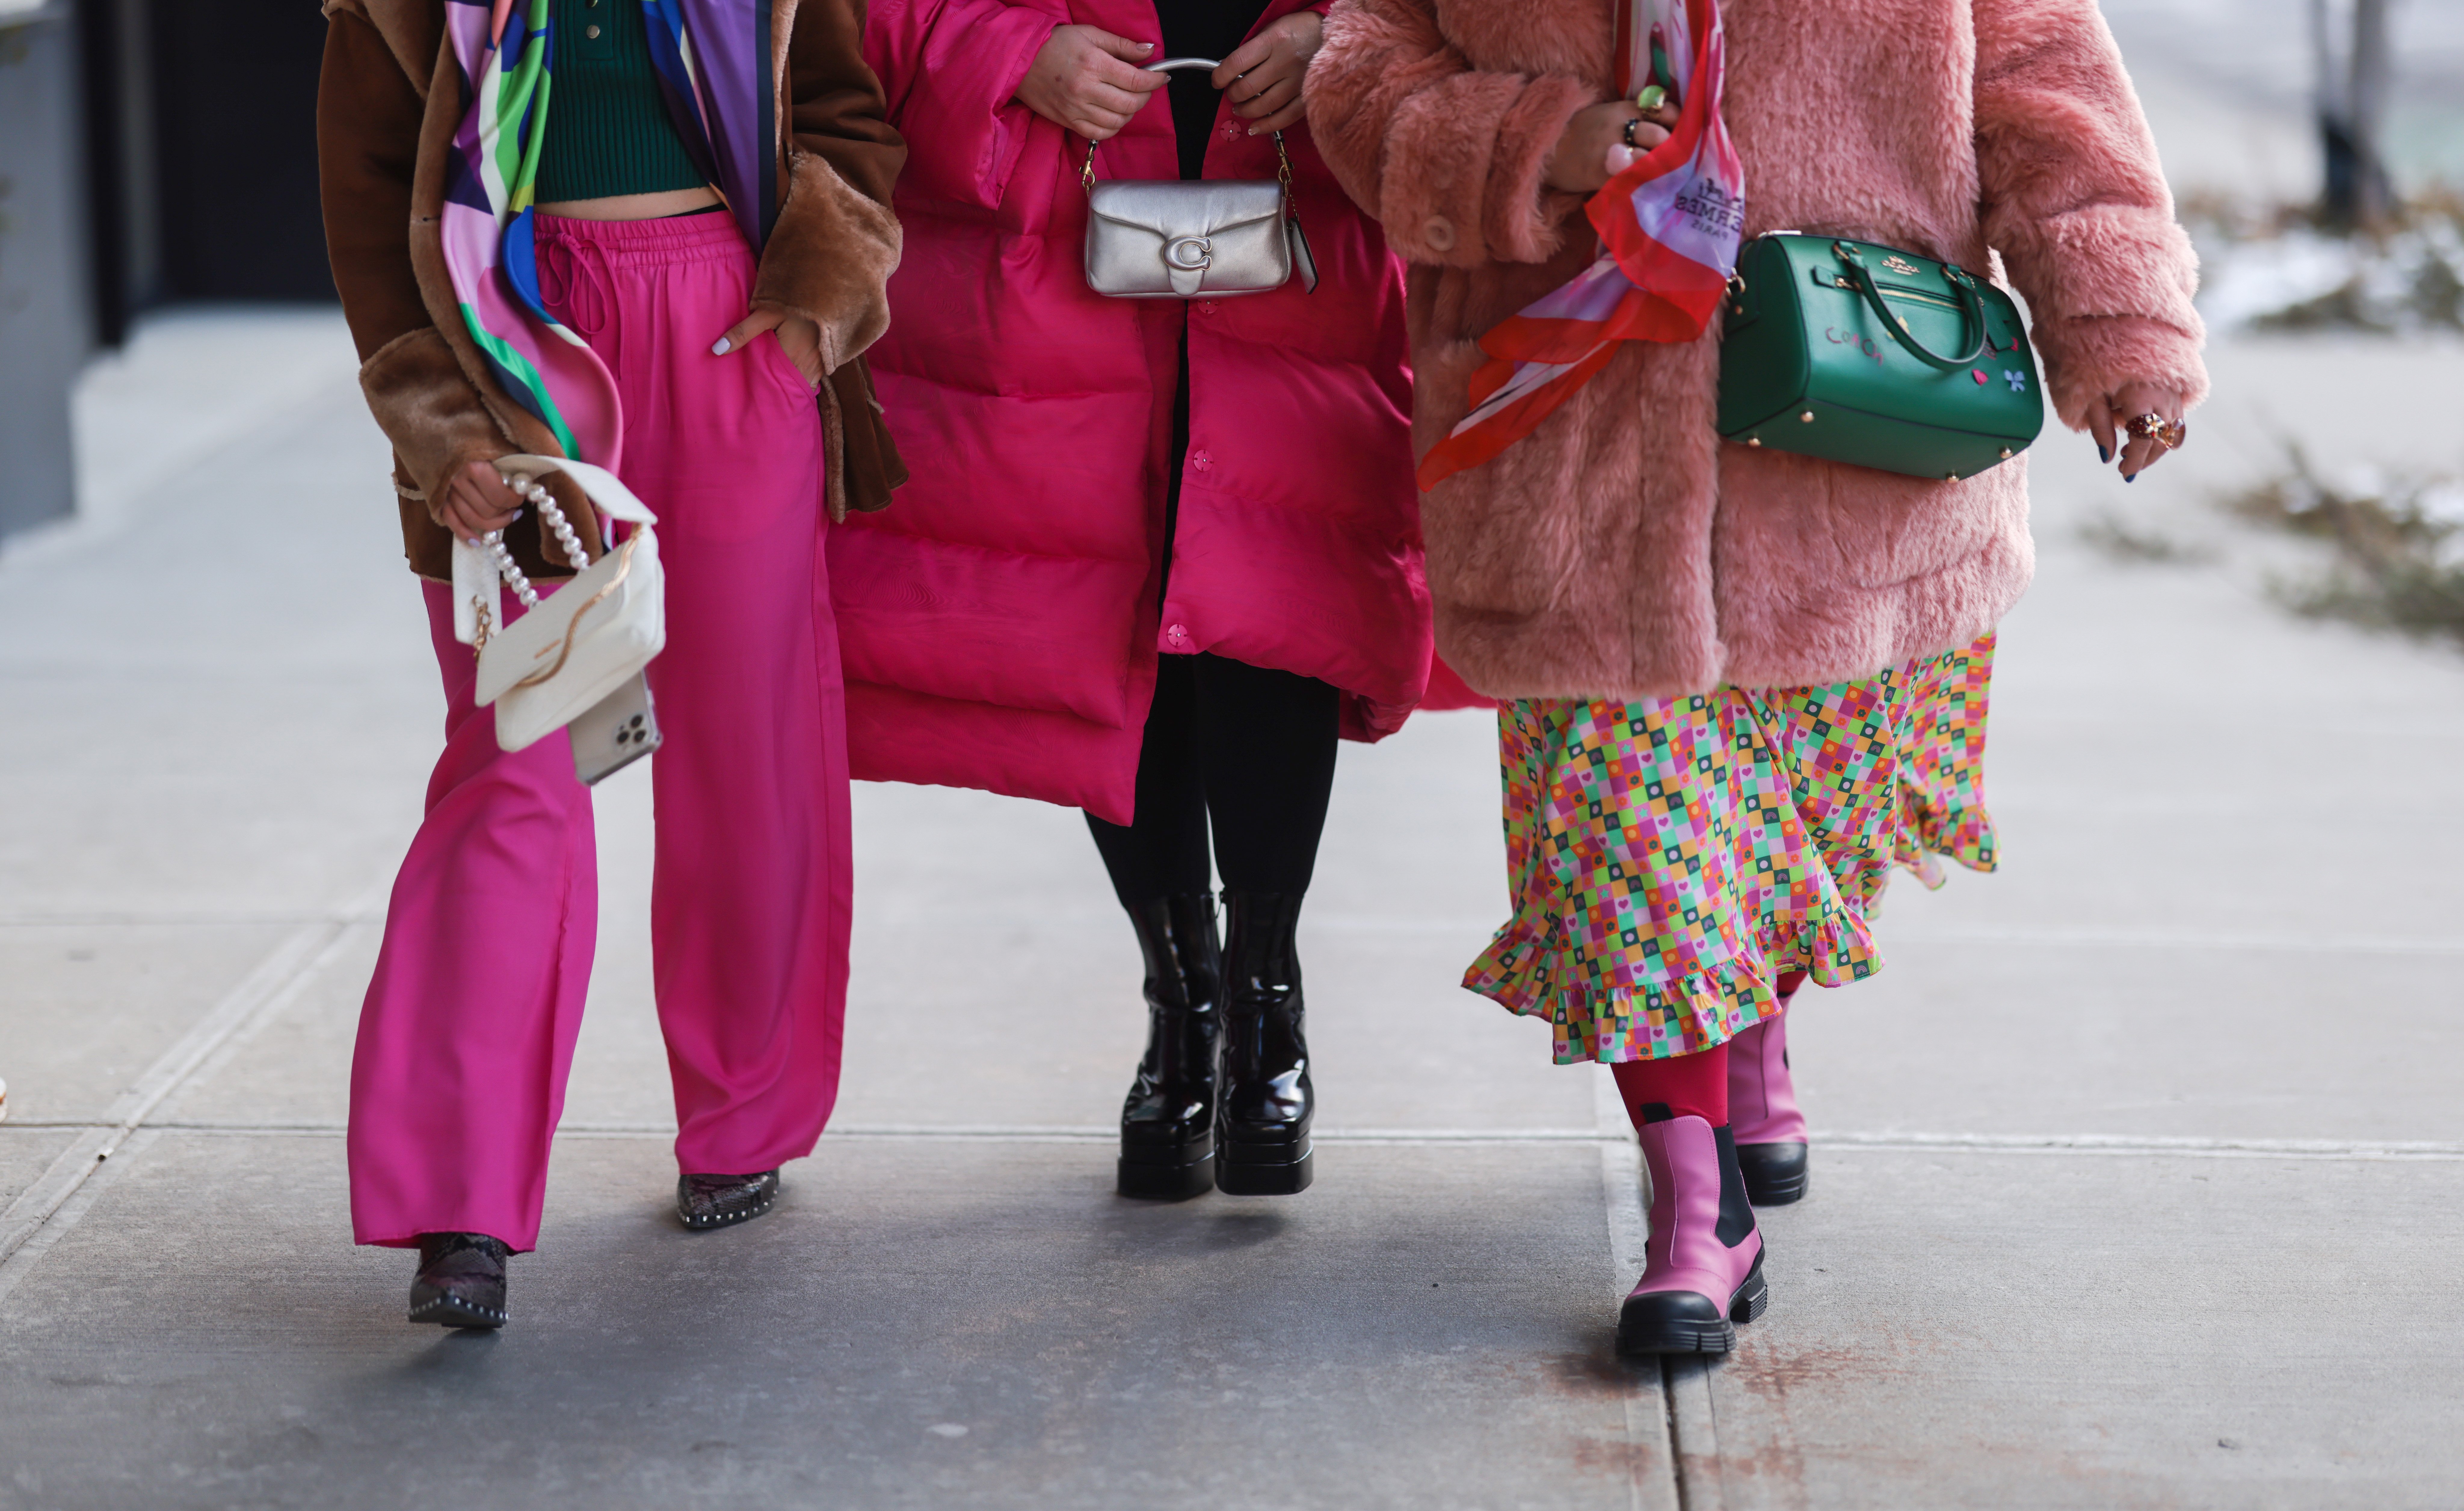 Vibrant pinks and reds are co-ordinated among friends in voluminous oversized layers at New York...